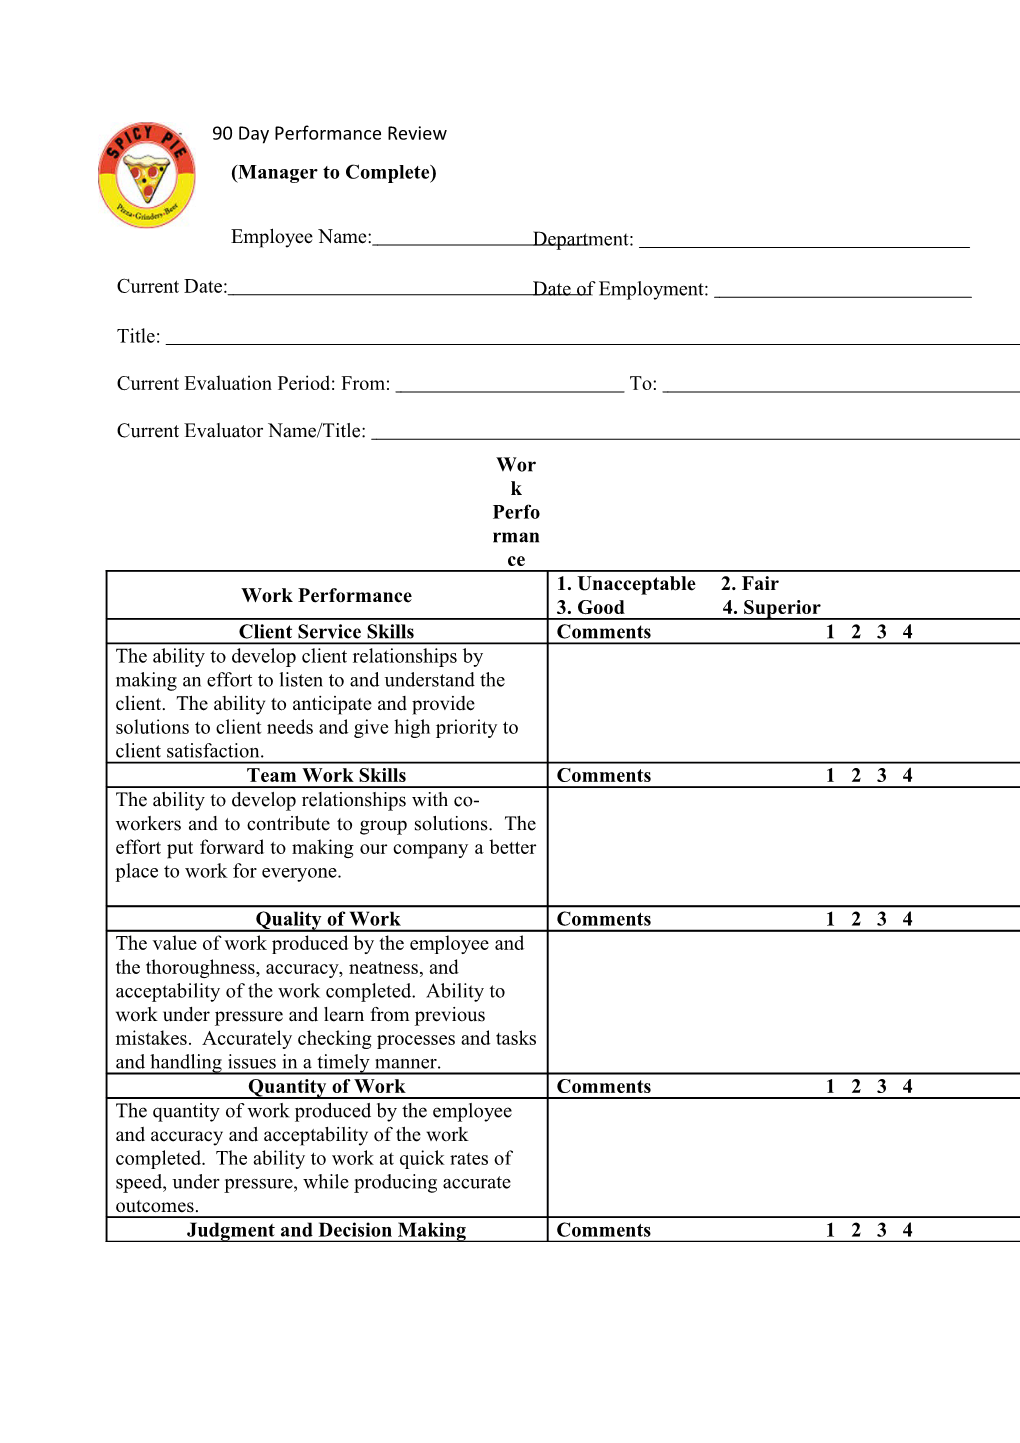 90 Day Performance Review Form